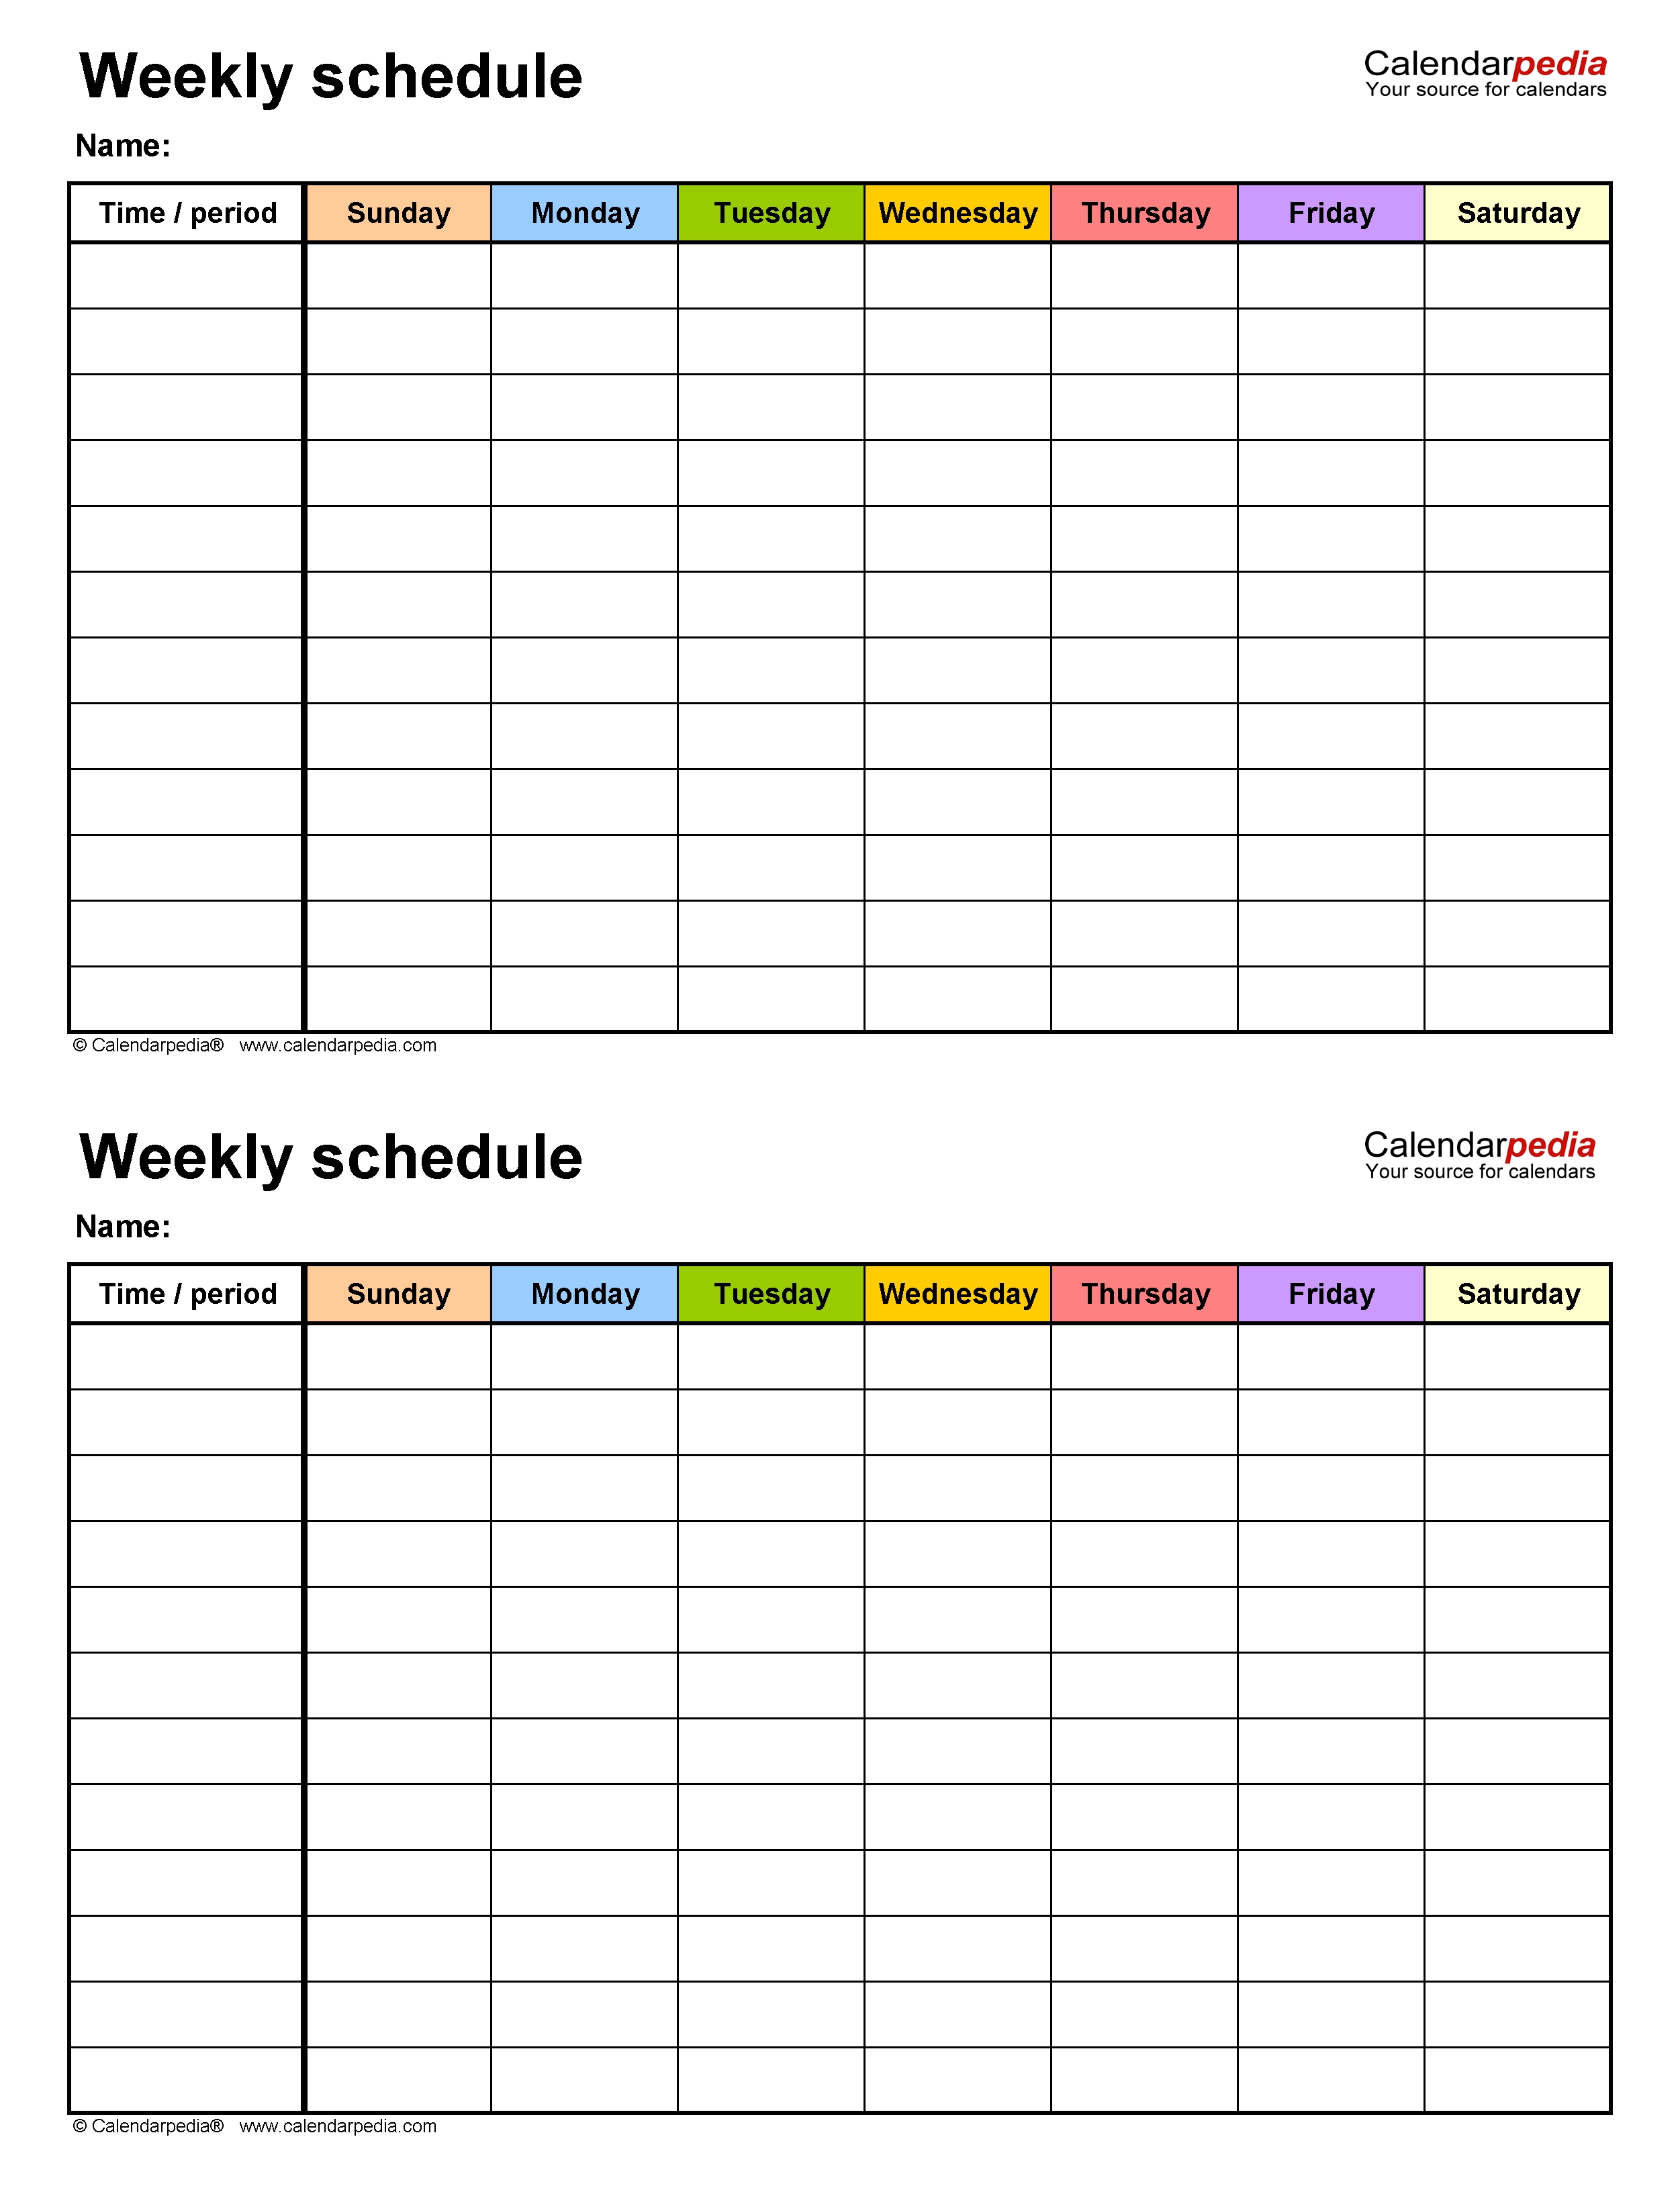 Free Weekly Schedule Templates For Word - 18 Templates 2 Week Calendar Template Free